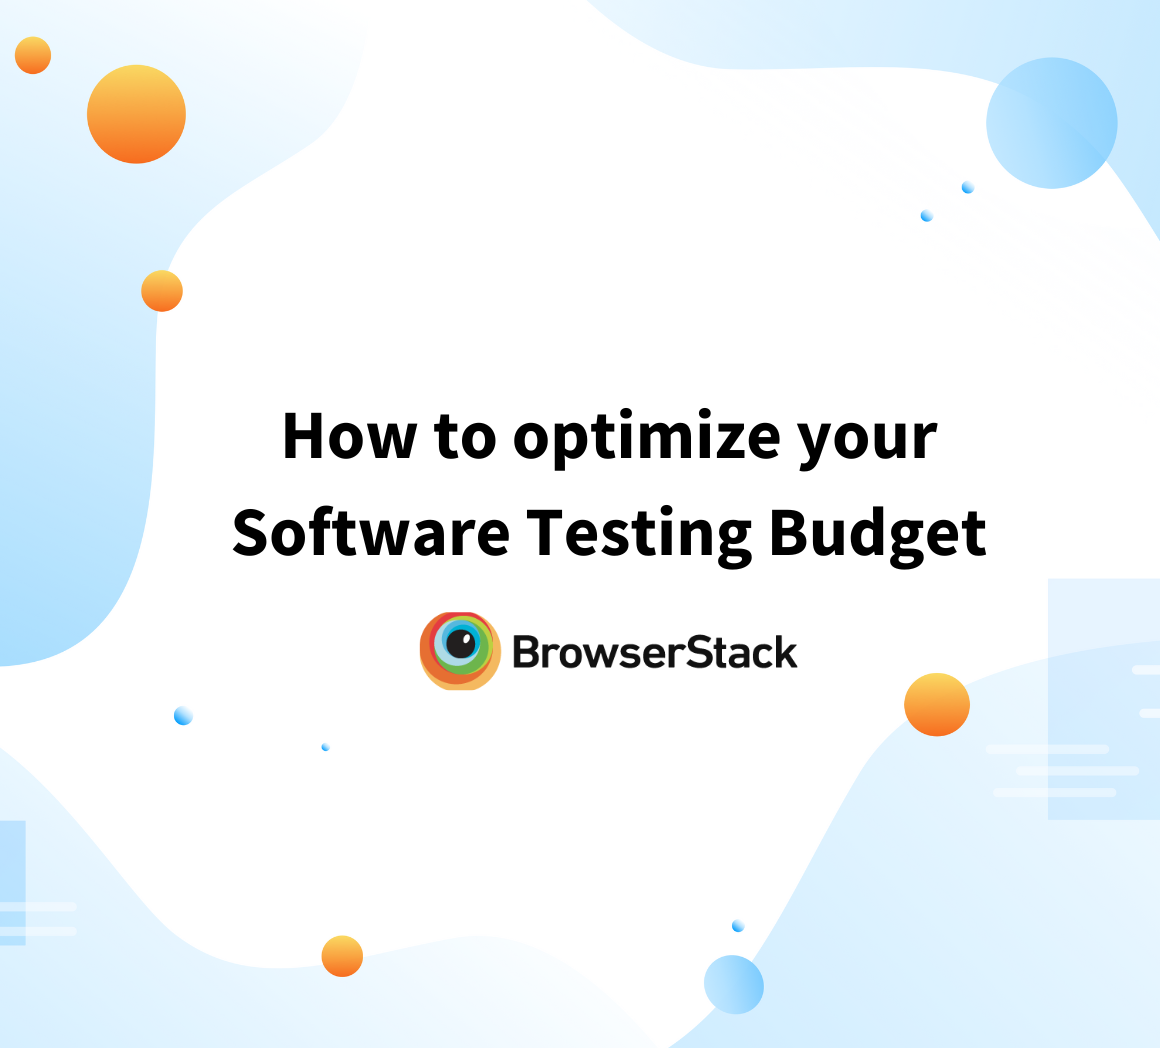 How to optimize your Software Testing Budget to get most value out of it